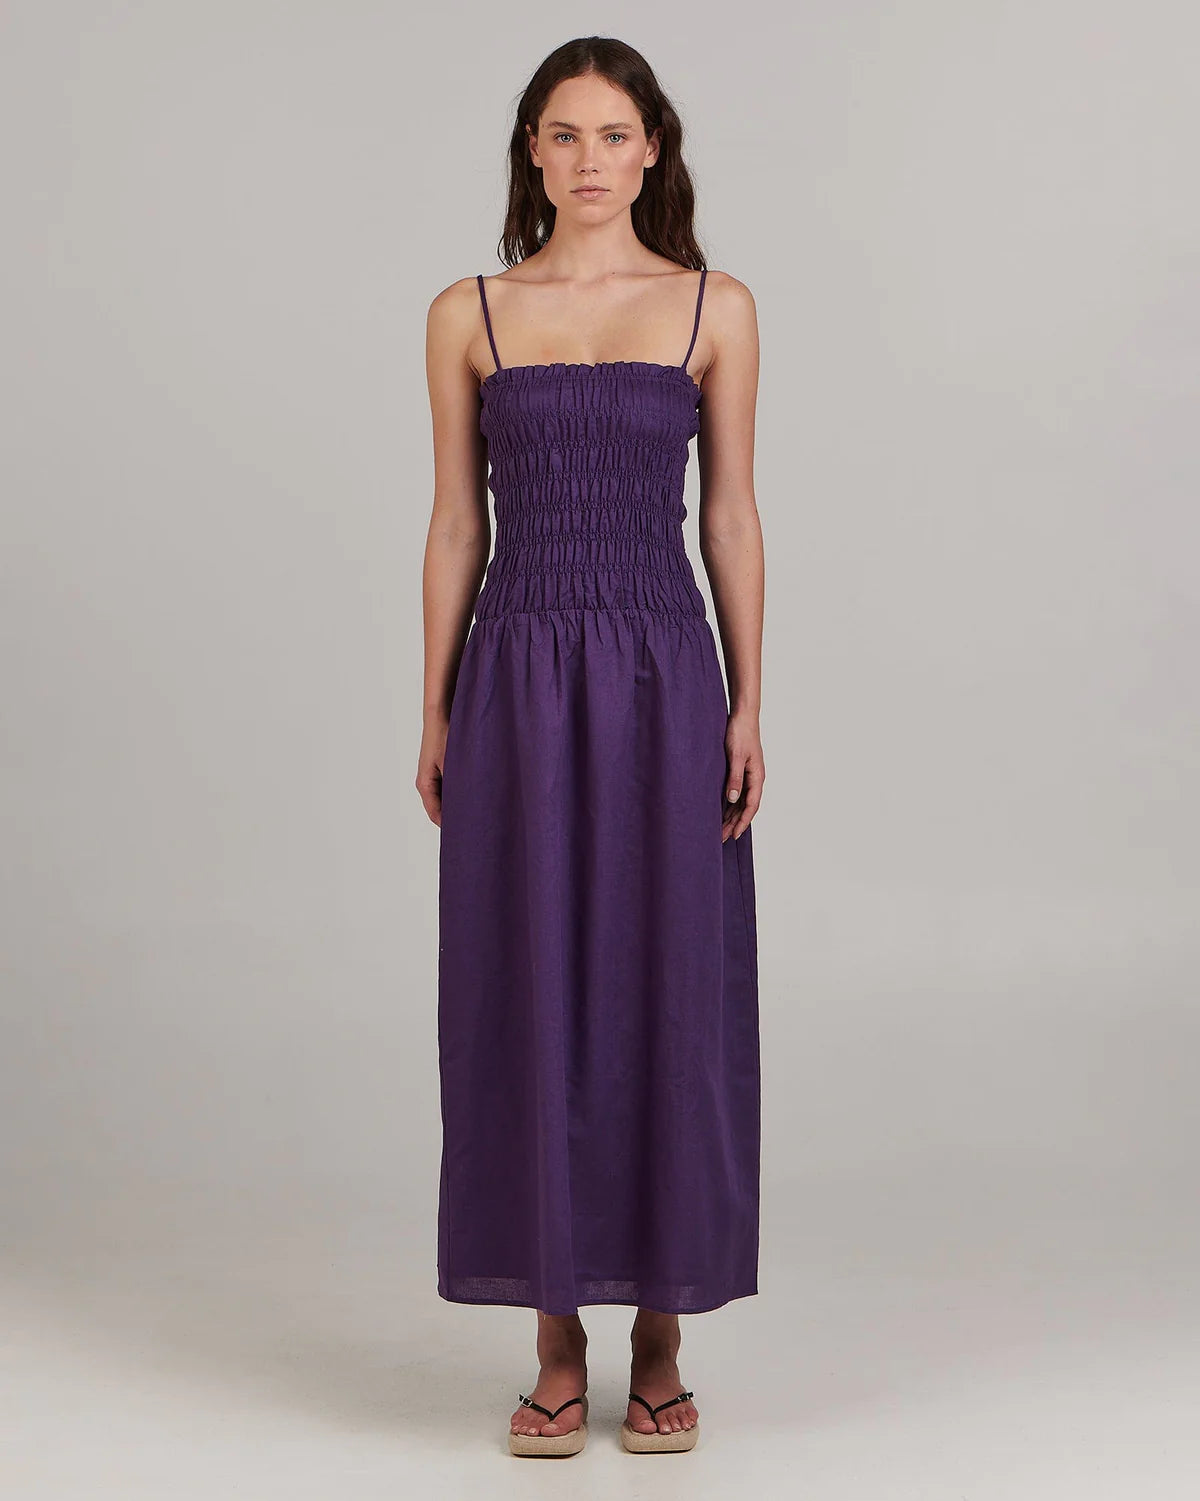 With a shirred bodice and flared skirt this elegant sundress makes a splash in a saturated purple hue. The shoestring straps can be worn as intended or tucked away to convert to a strapless dress. Wear with stacked heels for a night out or with bare feet by day